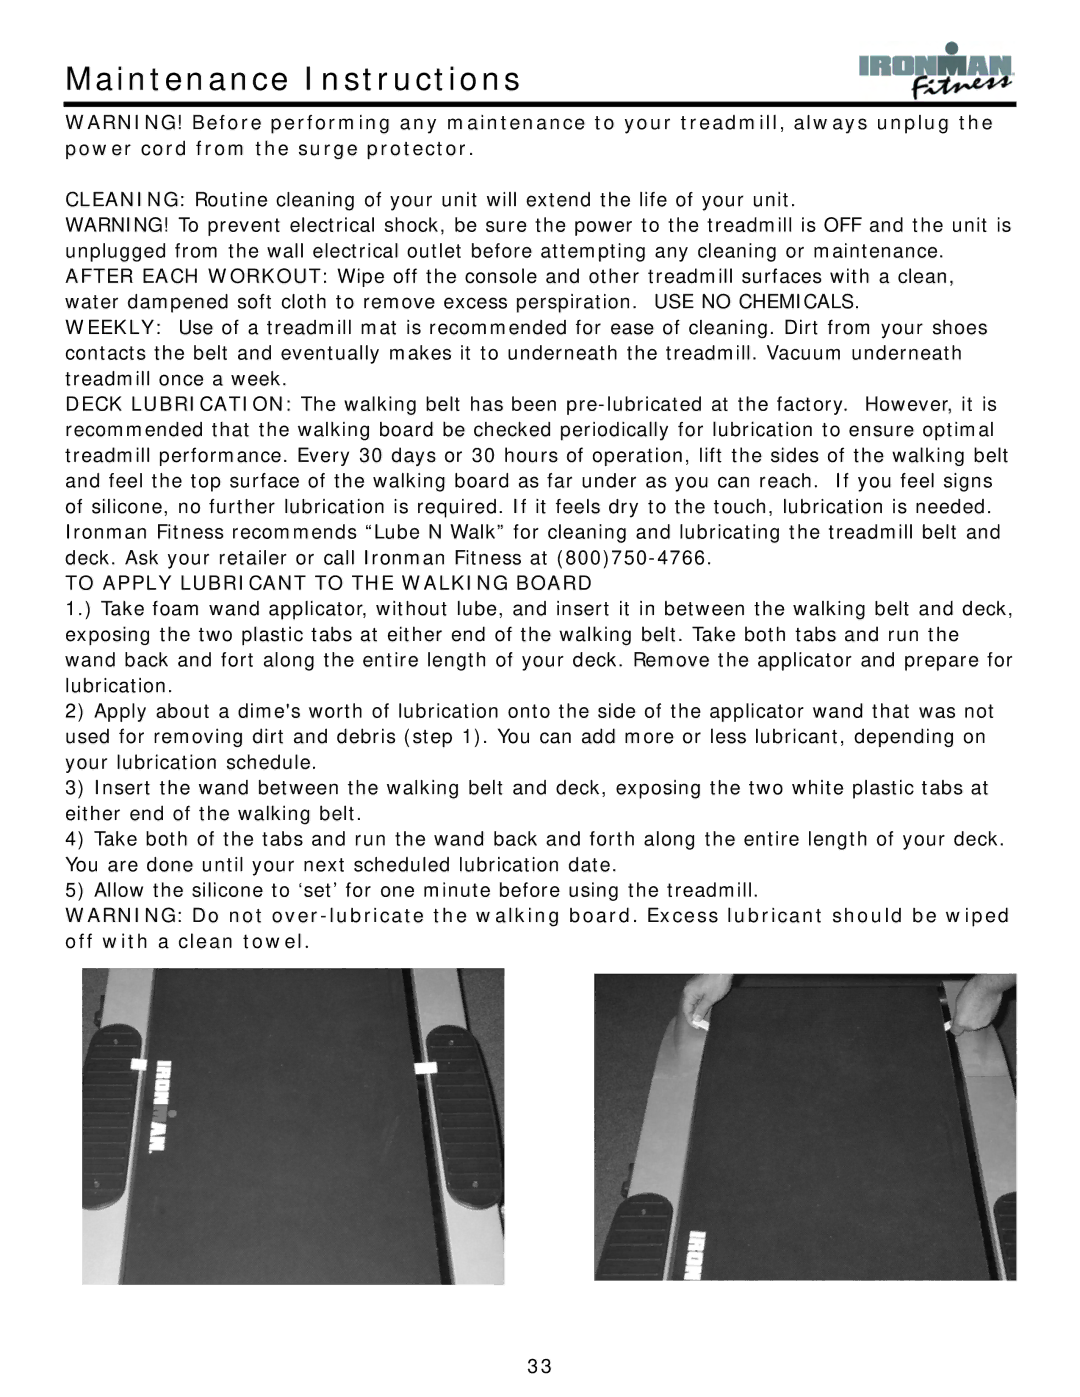 Ironman Fitness Quest owner manual Maintenance Instructions, To Apply Lubricant to the Walking Board 